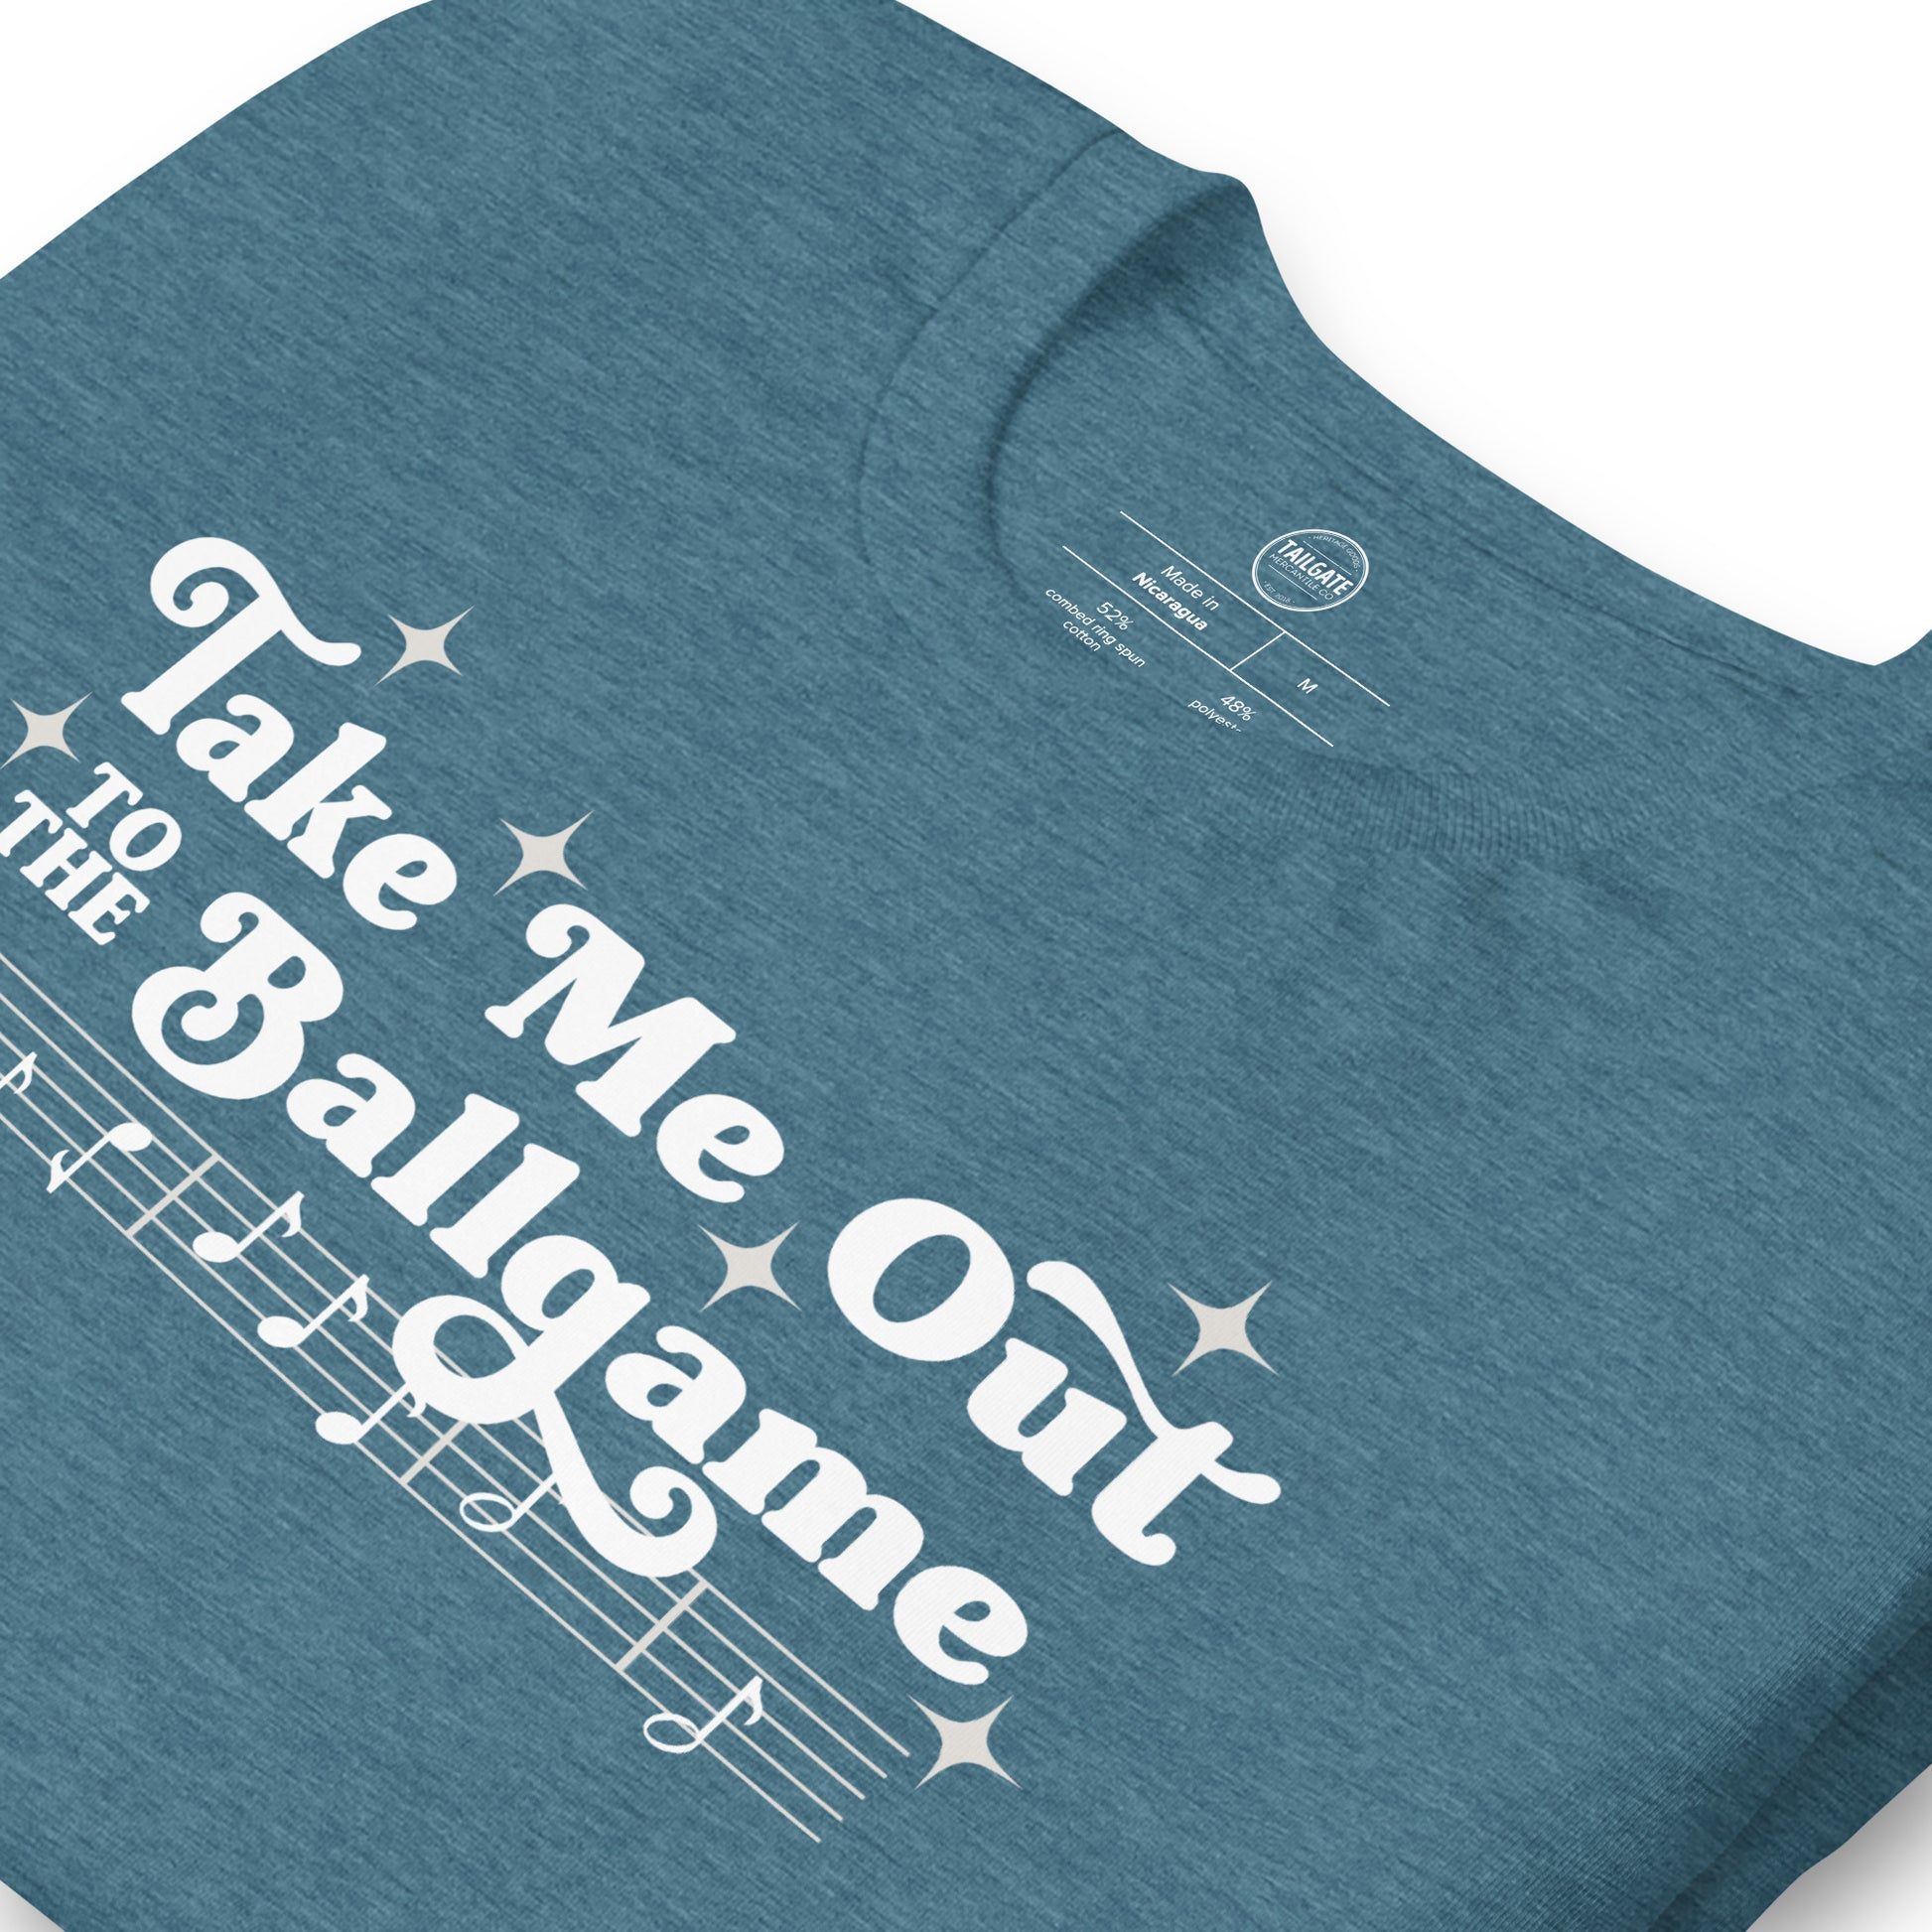 Close up image of heather teal t-shirt with design of "Take Me Out to the Ballgame" with coordinating musical notes in white located on centre chest. This design is exclusive to Tailgate Mercantile and available only online.